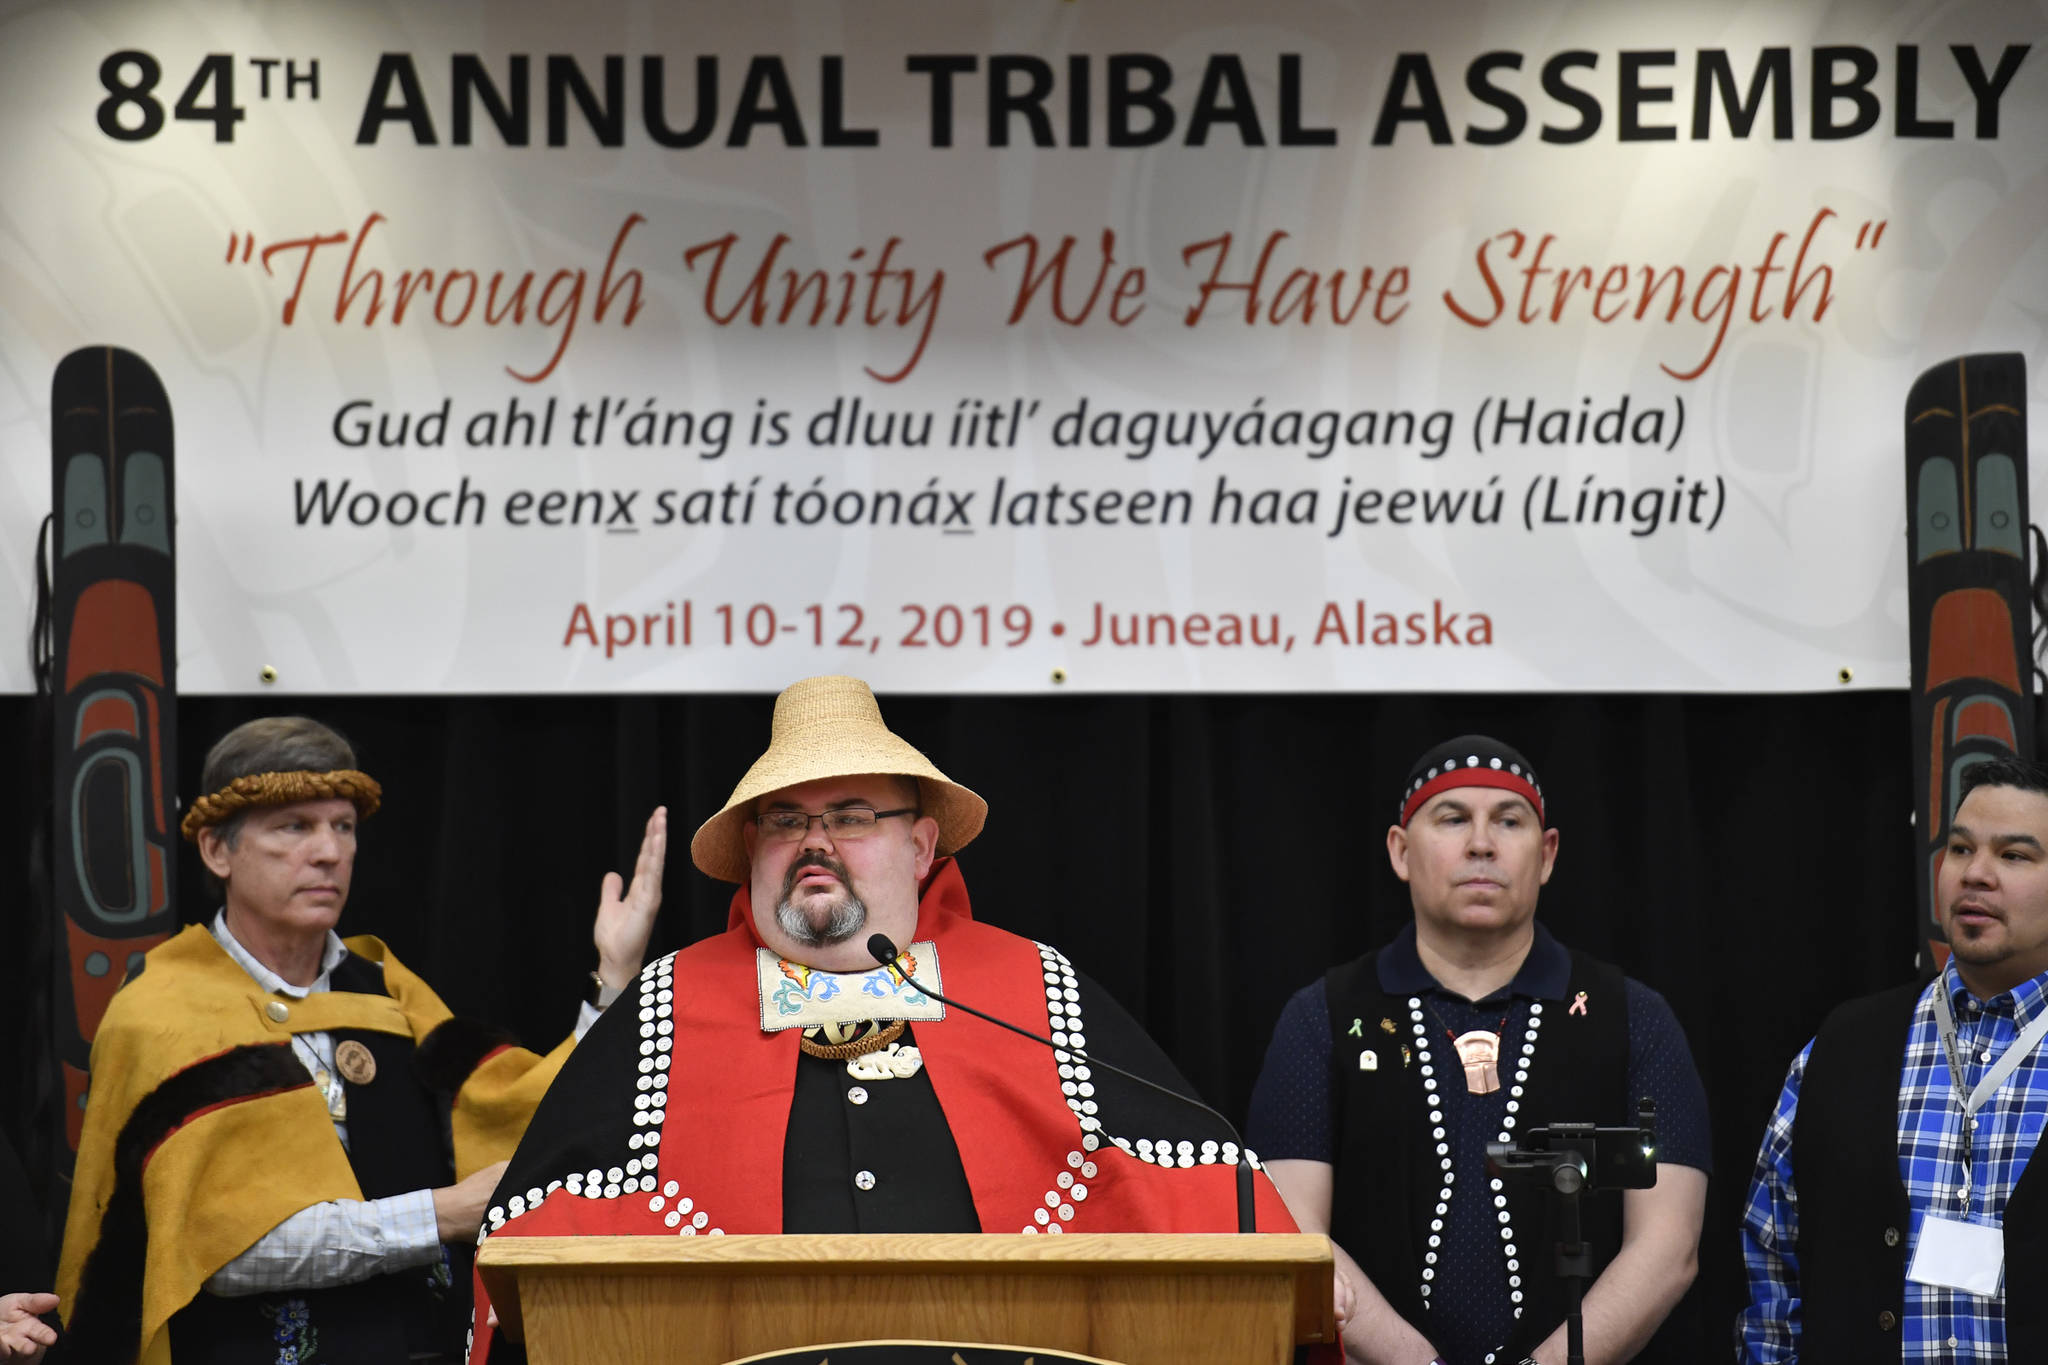 85th Annual Tribal Assembly postponed